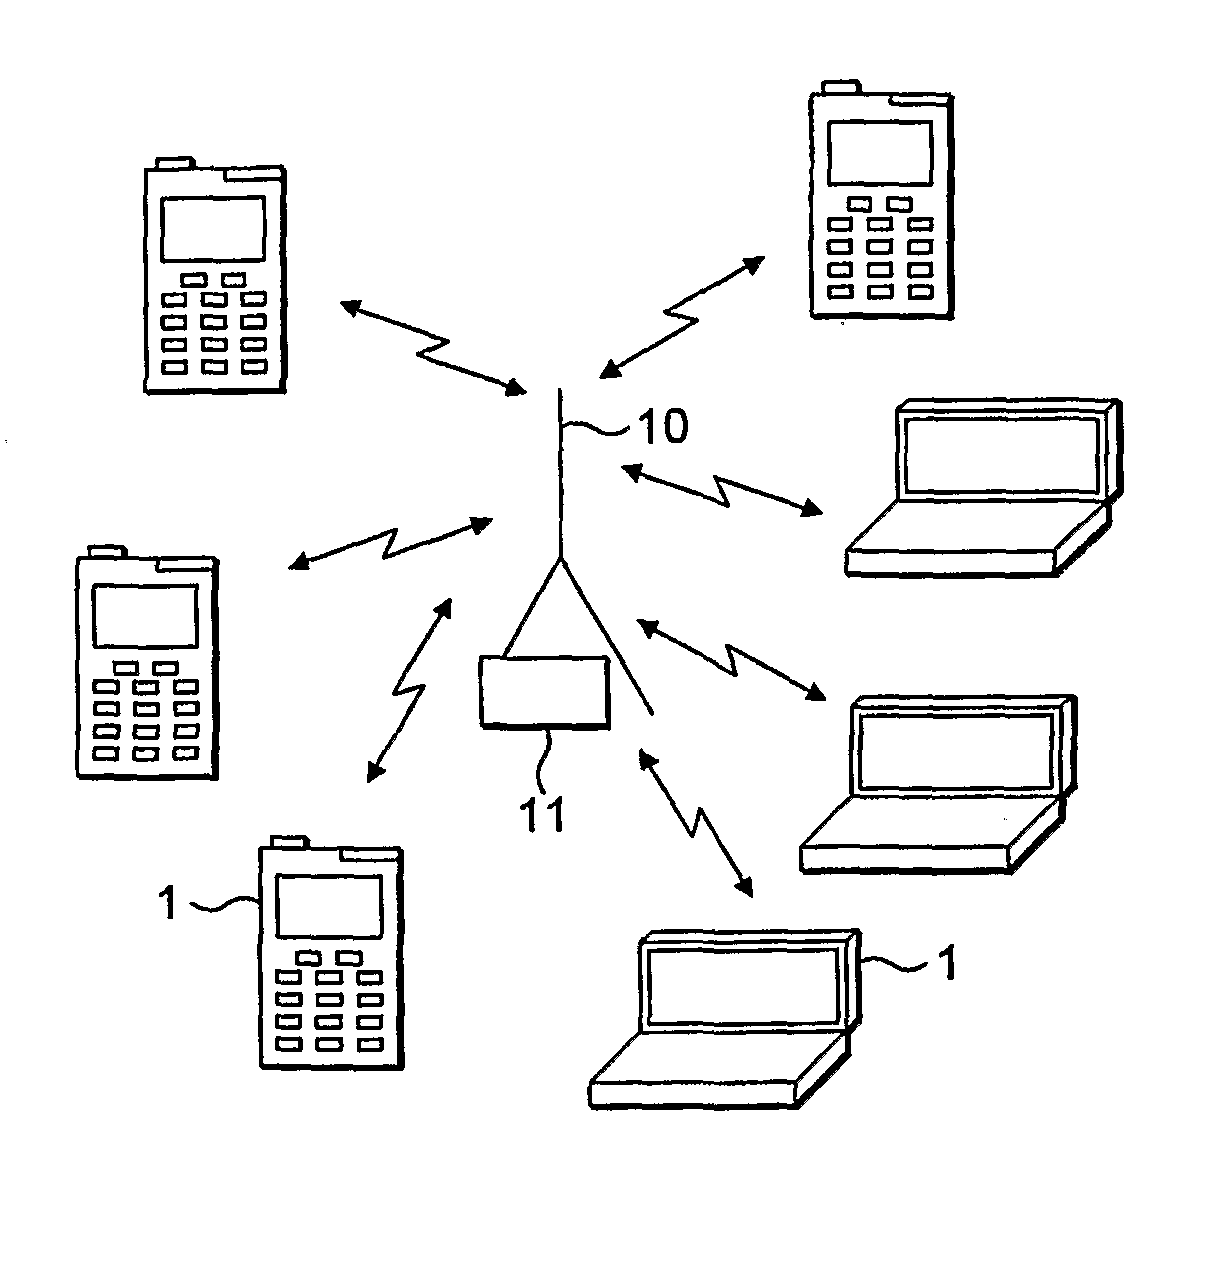 Method of Improving Coverage and Optimisation in Communication Networks